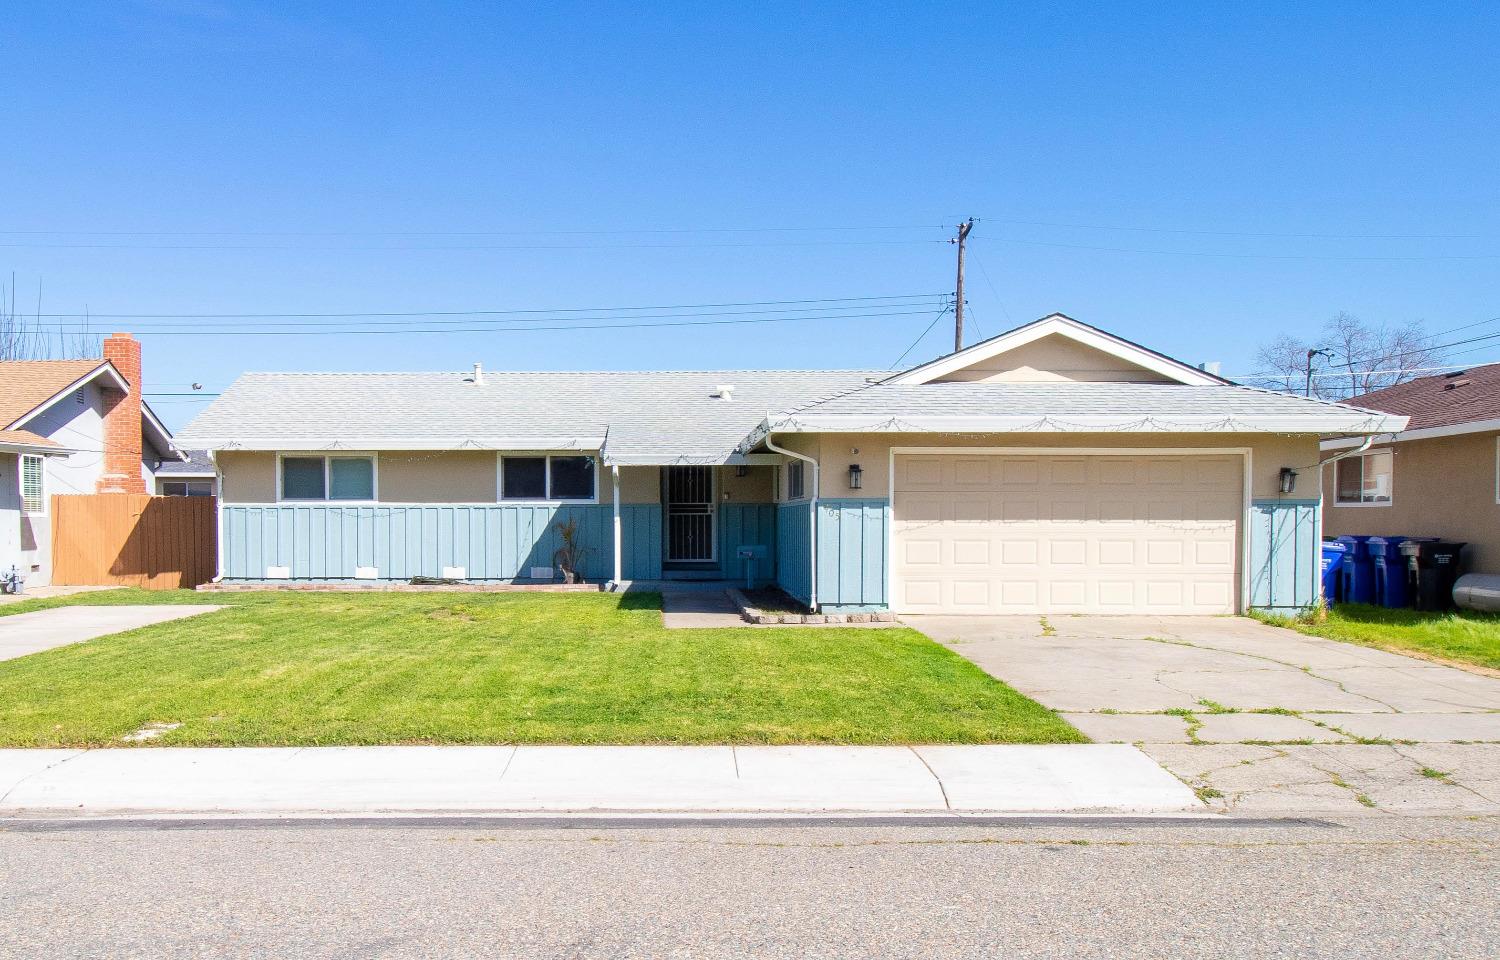 Photo of 405 Palin Ave in Galt, CA